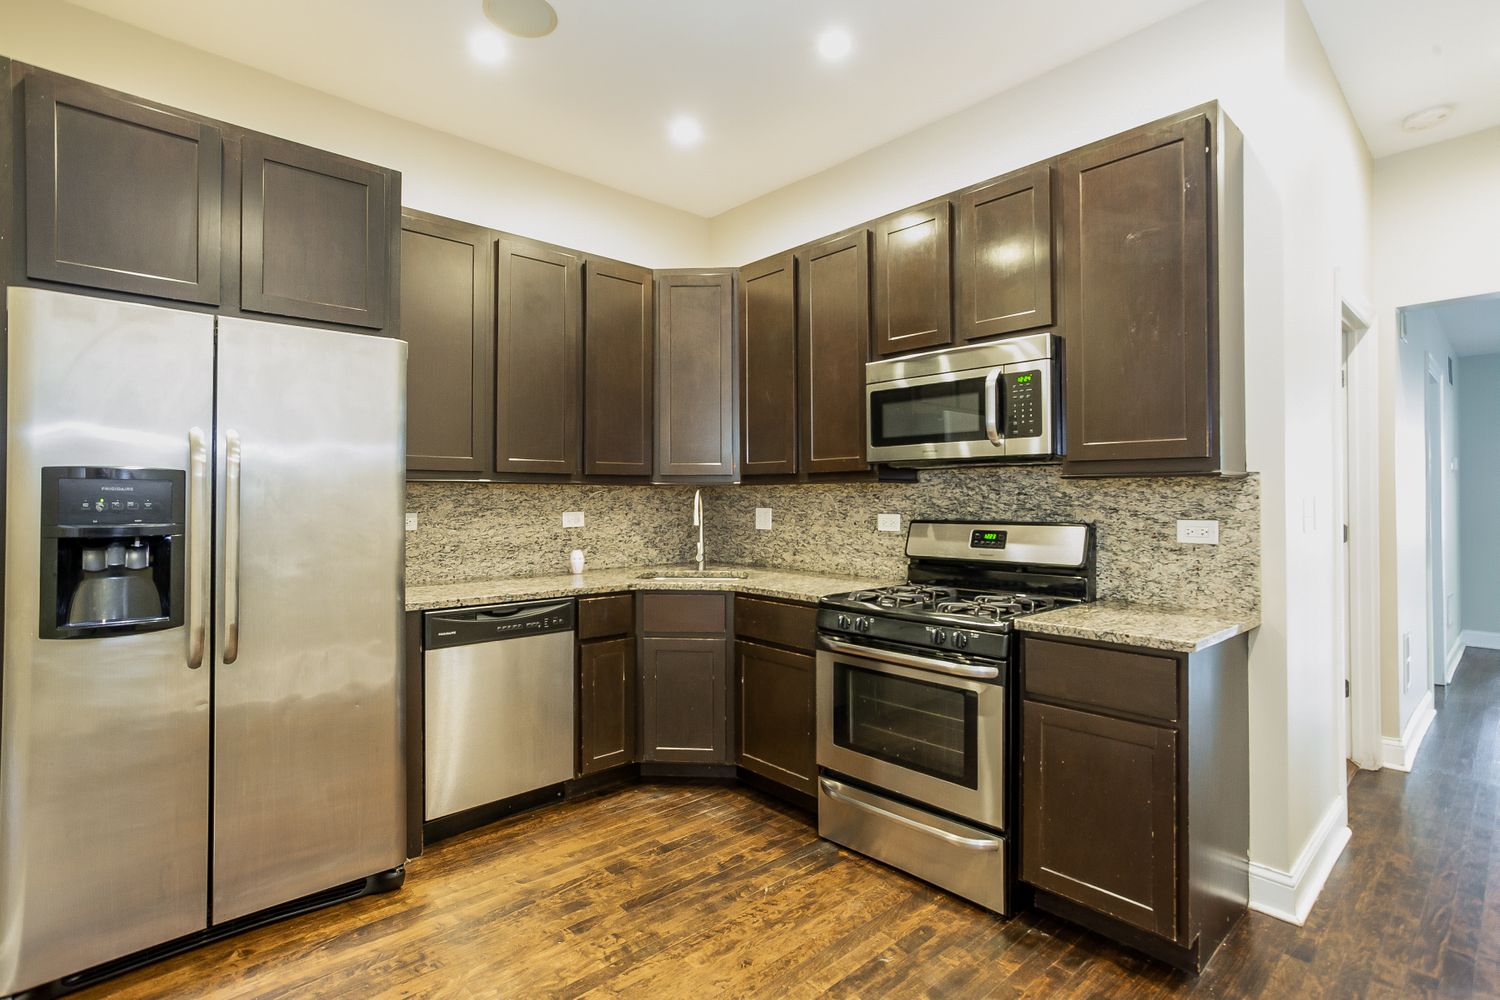 Upgraded kitchen with stainless steel appliances and recessed lighting at Invitation Homes Chicago.